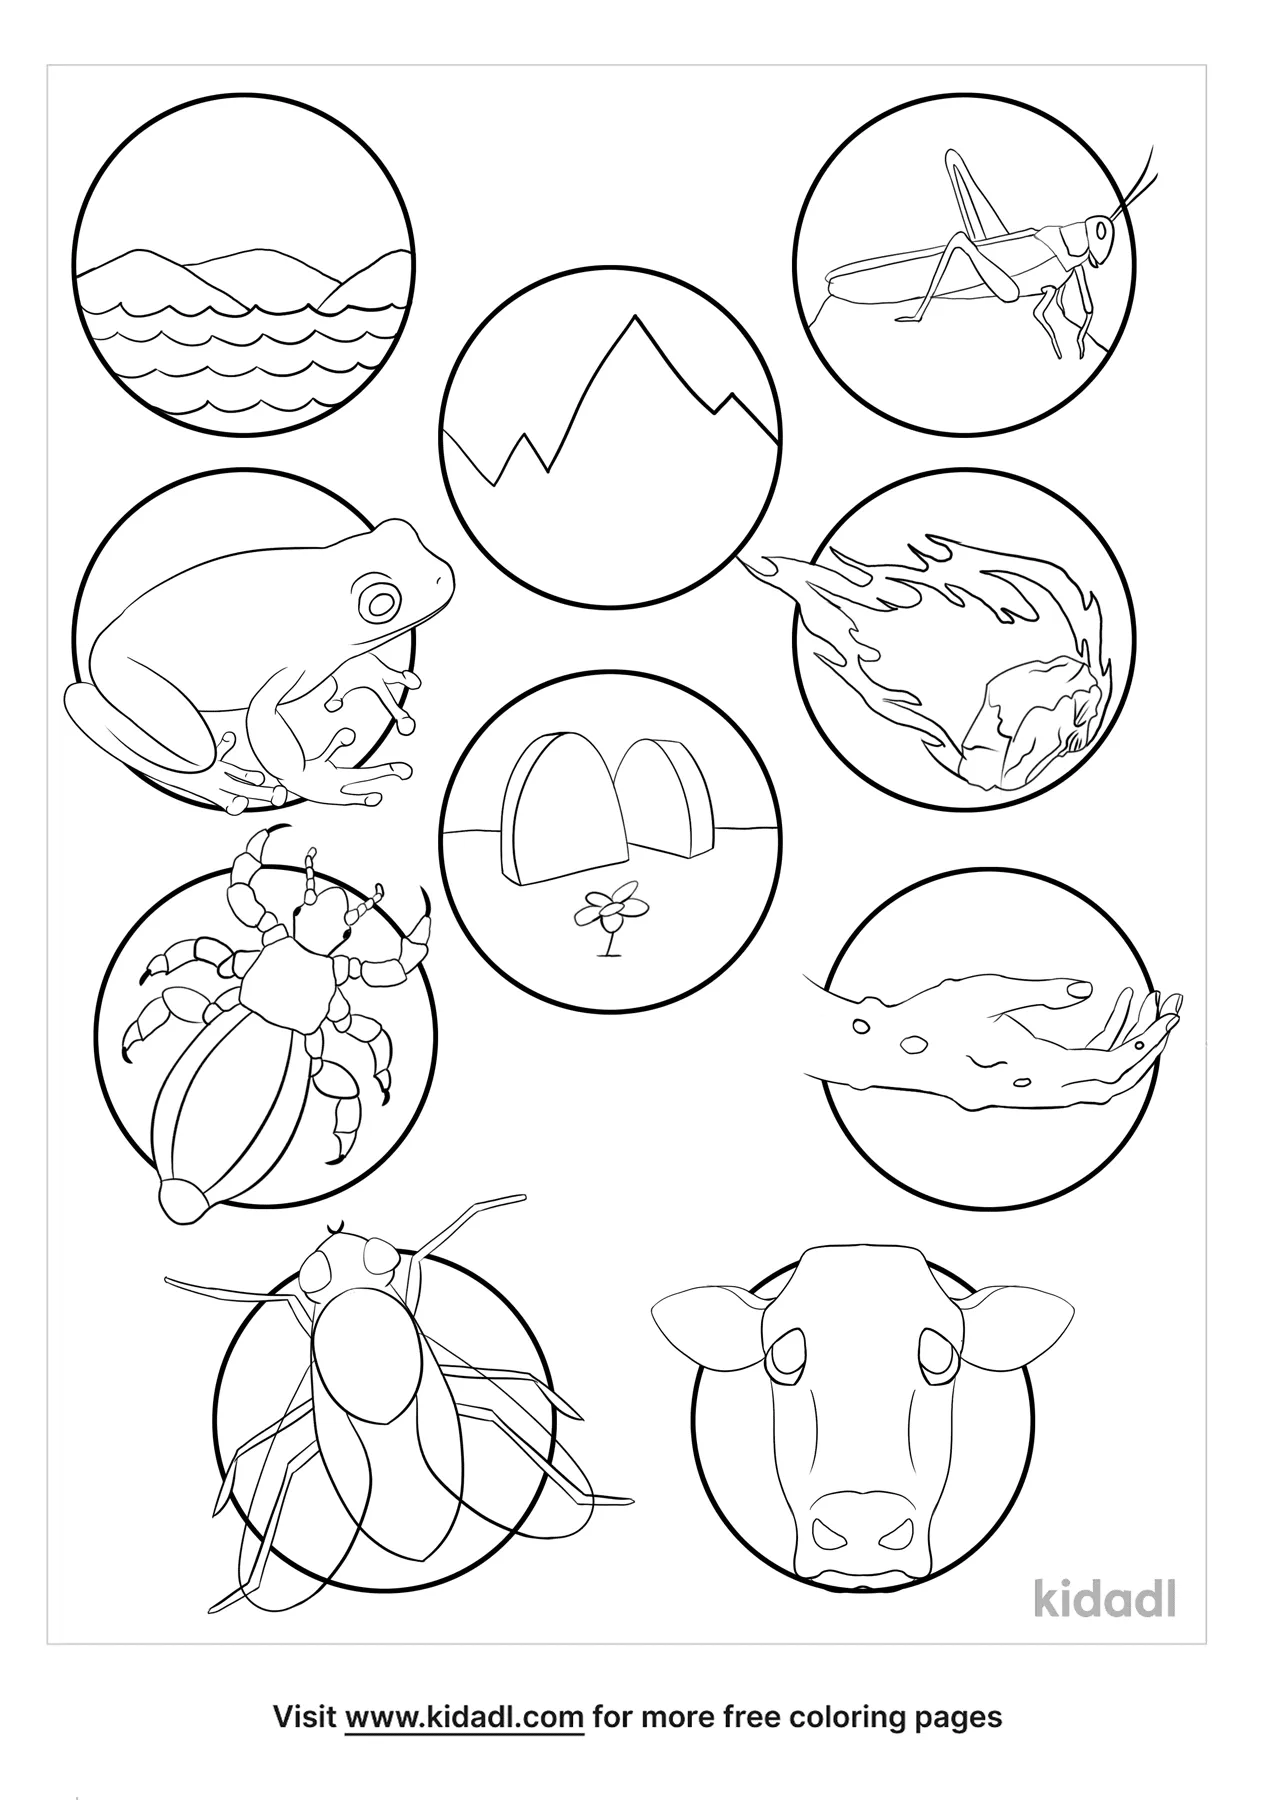 Free plagues of egypt coloring page coloring page printables